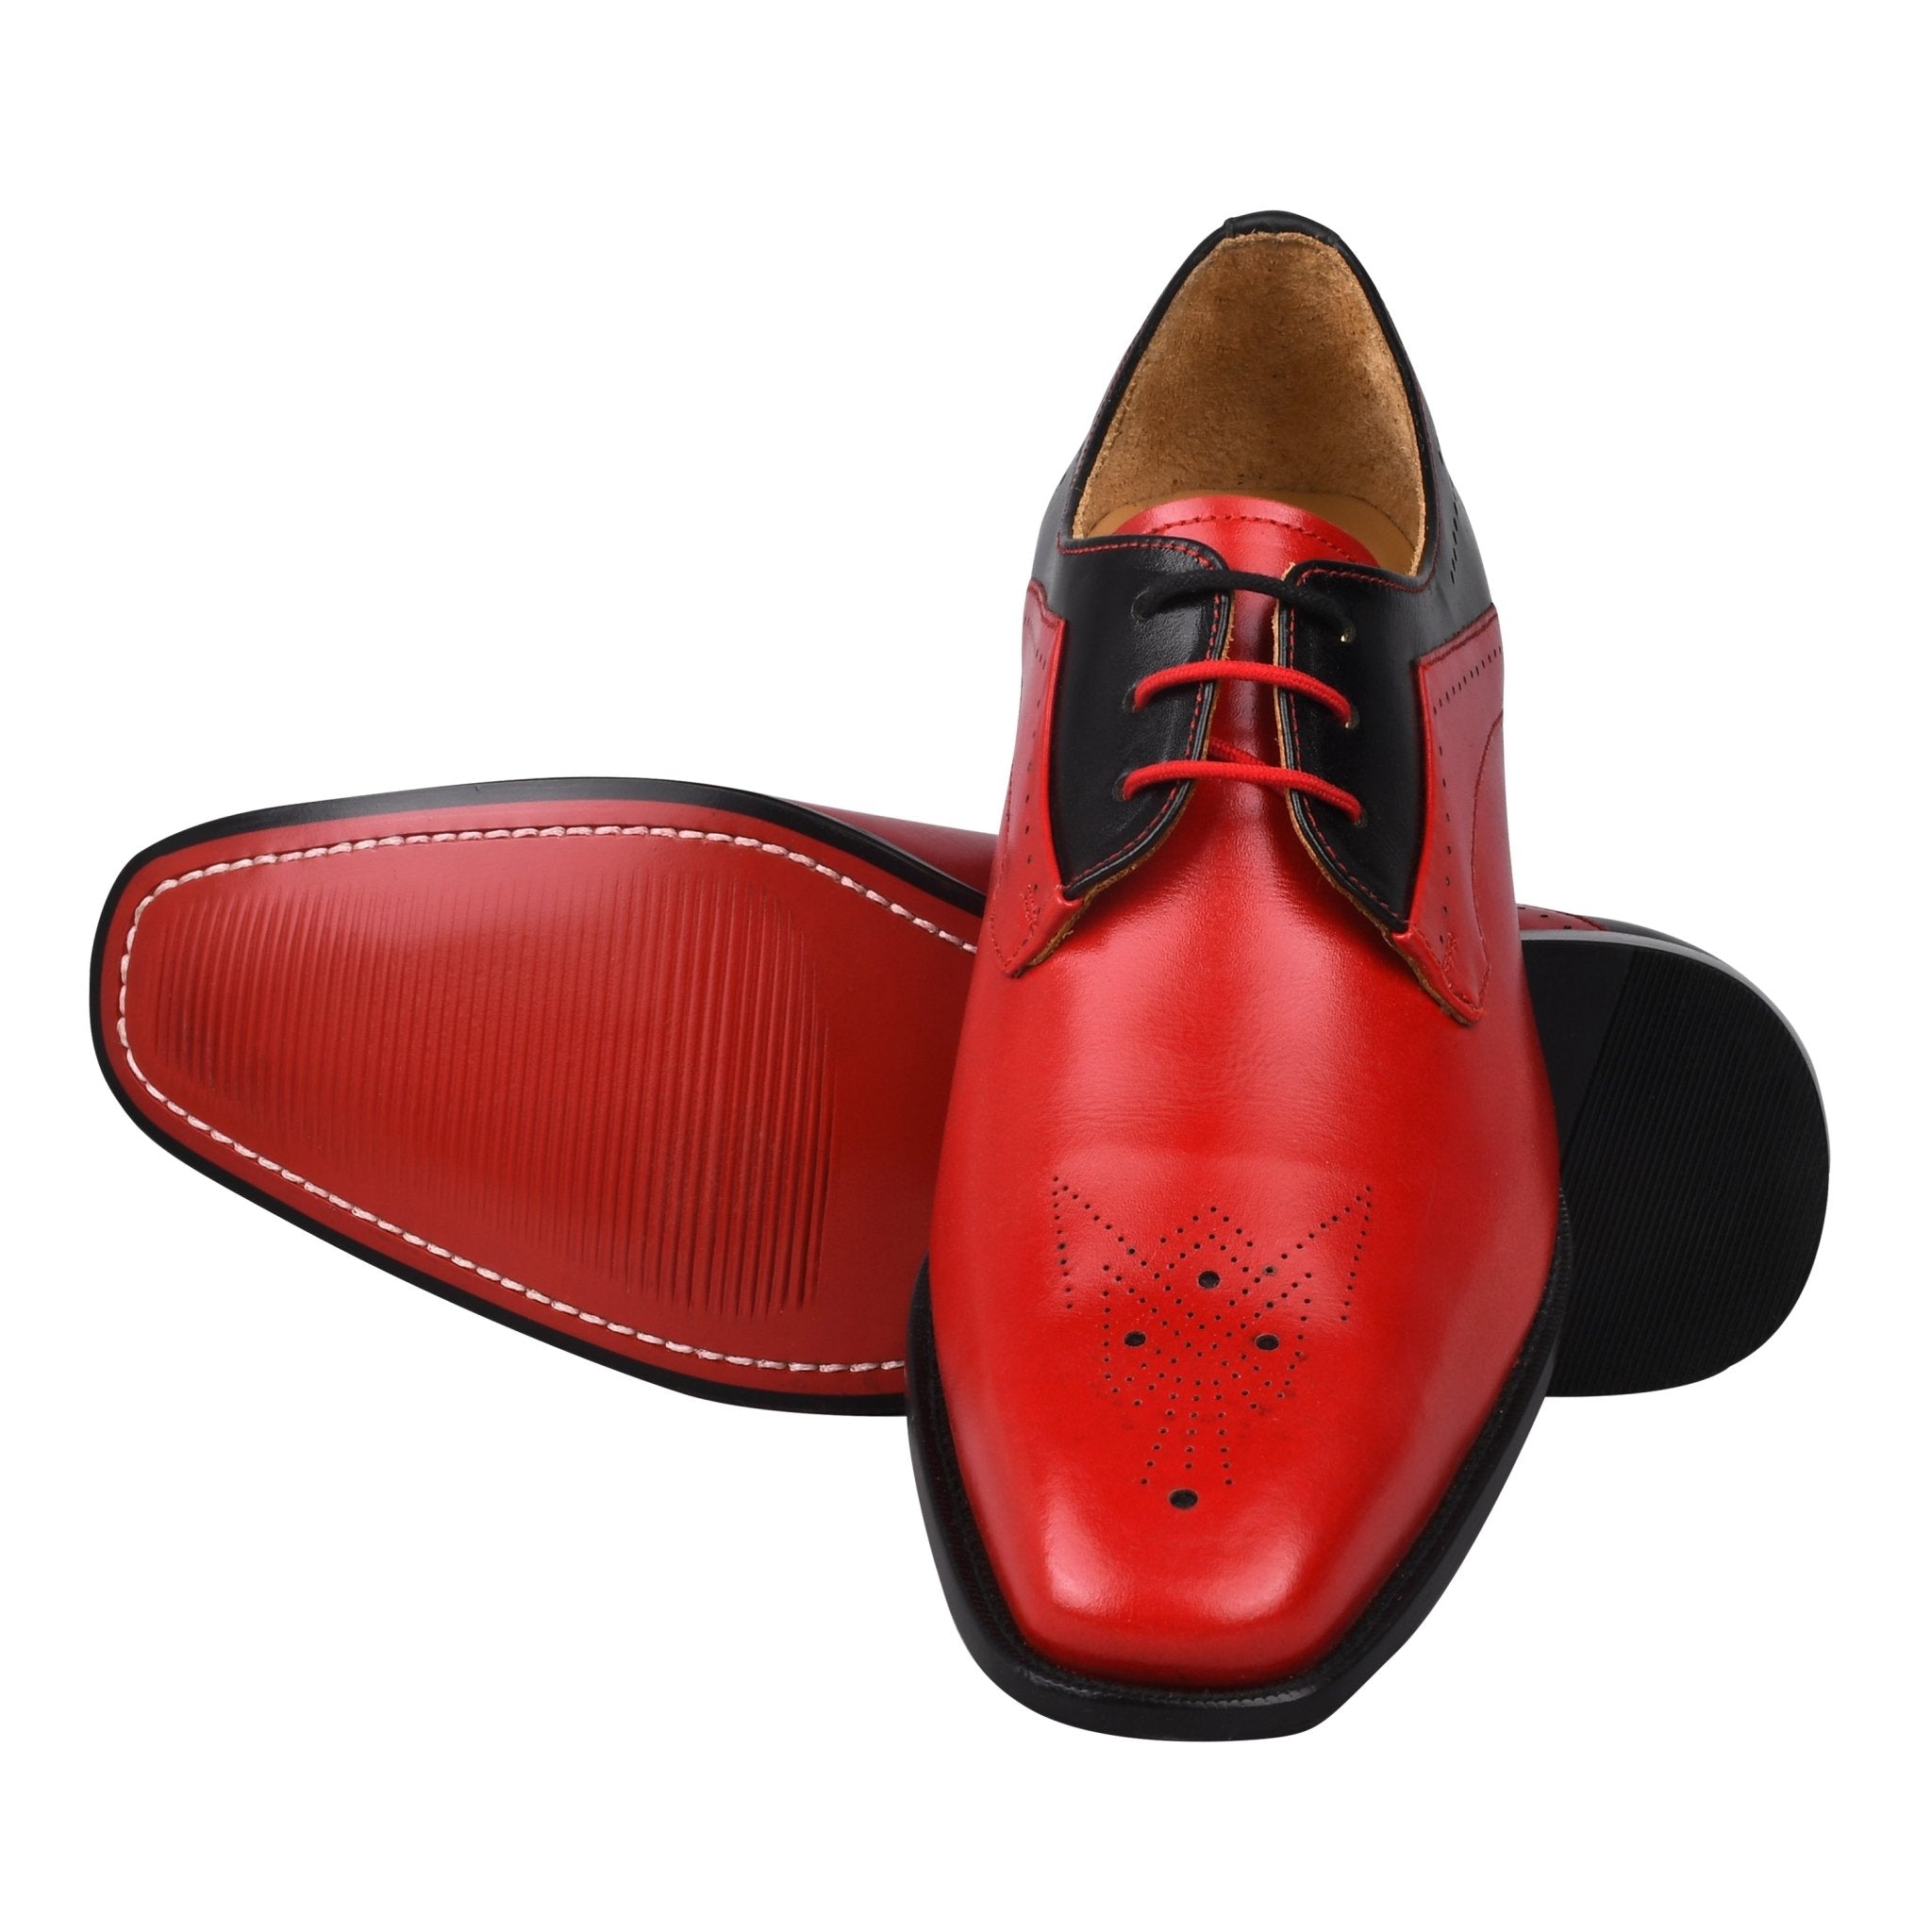 New Red Bottom Breathable Slip-On Casual Shoes Handmade Men Dress Shoes New  US